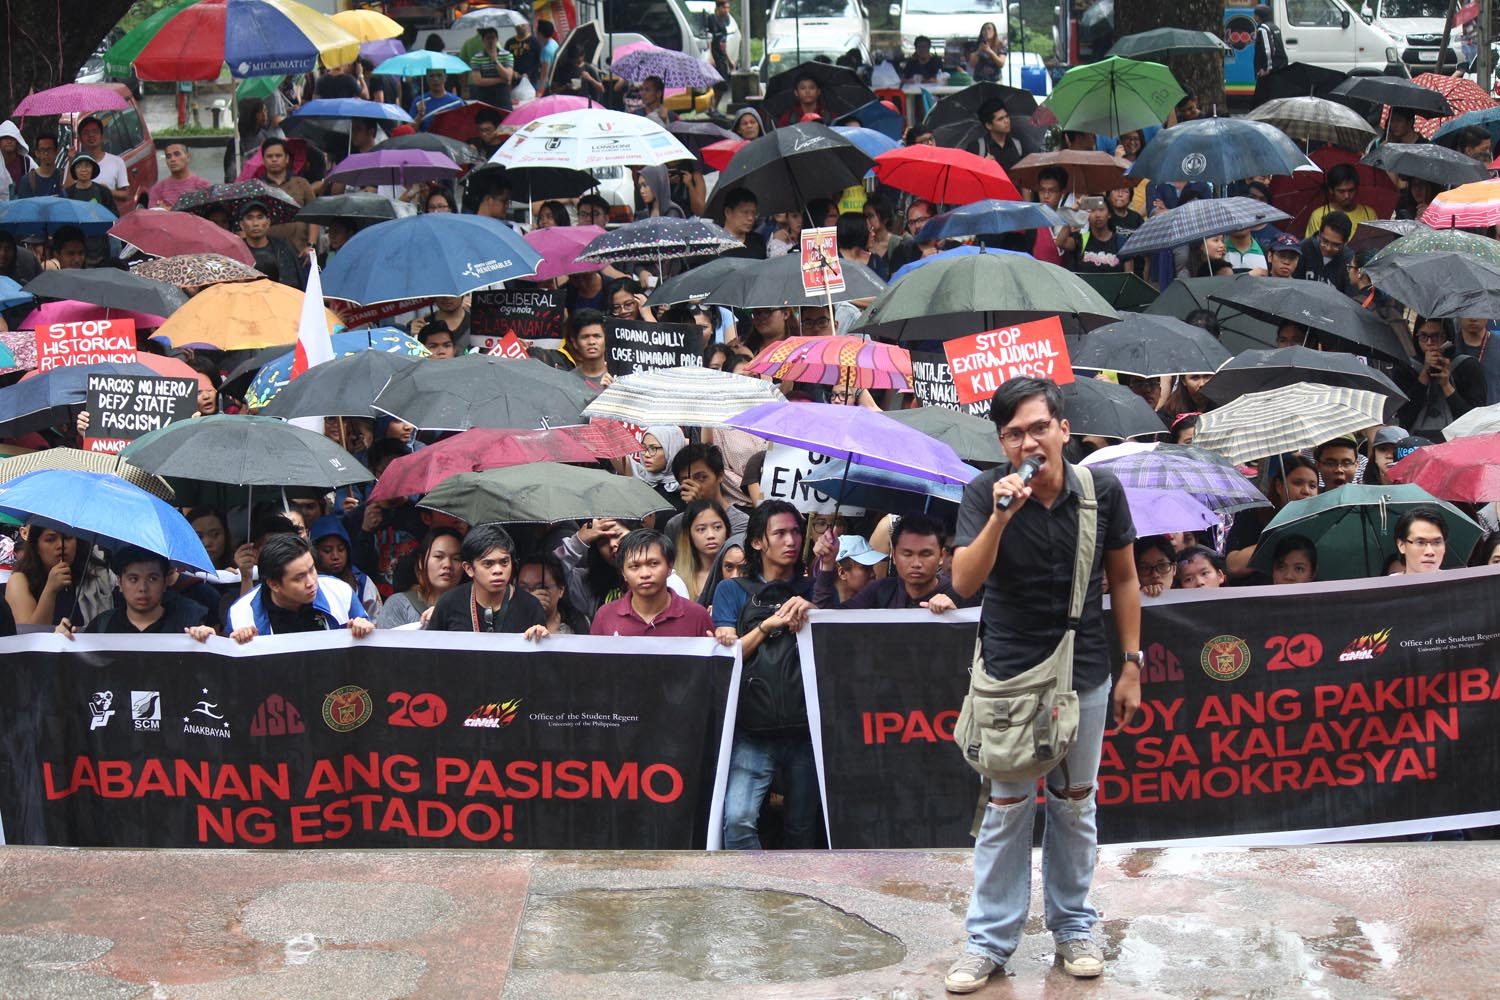 Students at anti-Marcos rally: We’re part of the fight